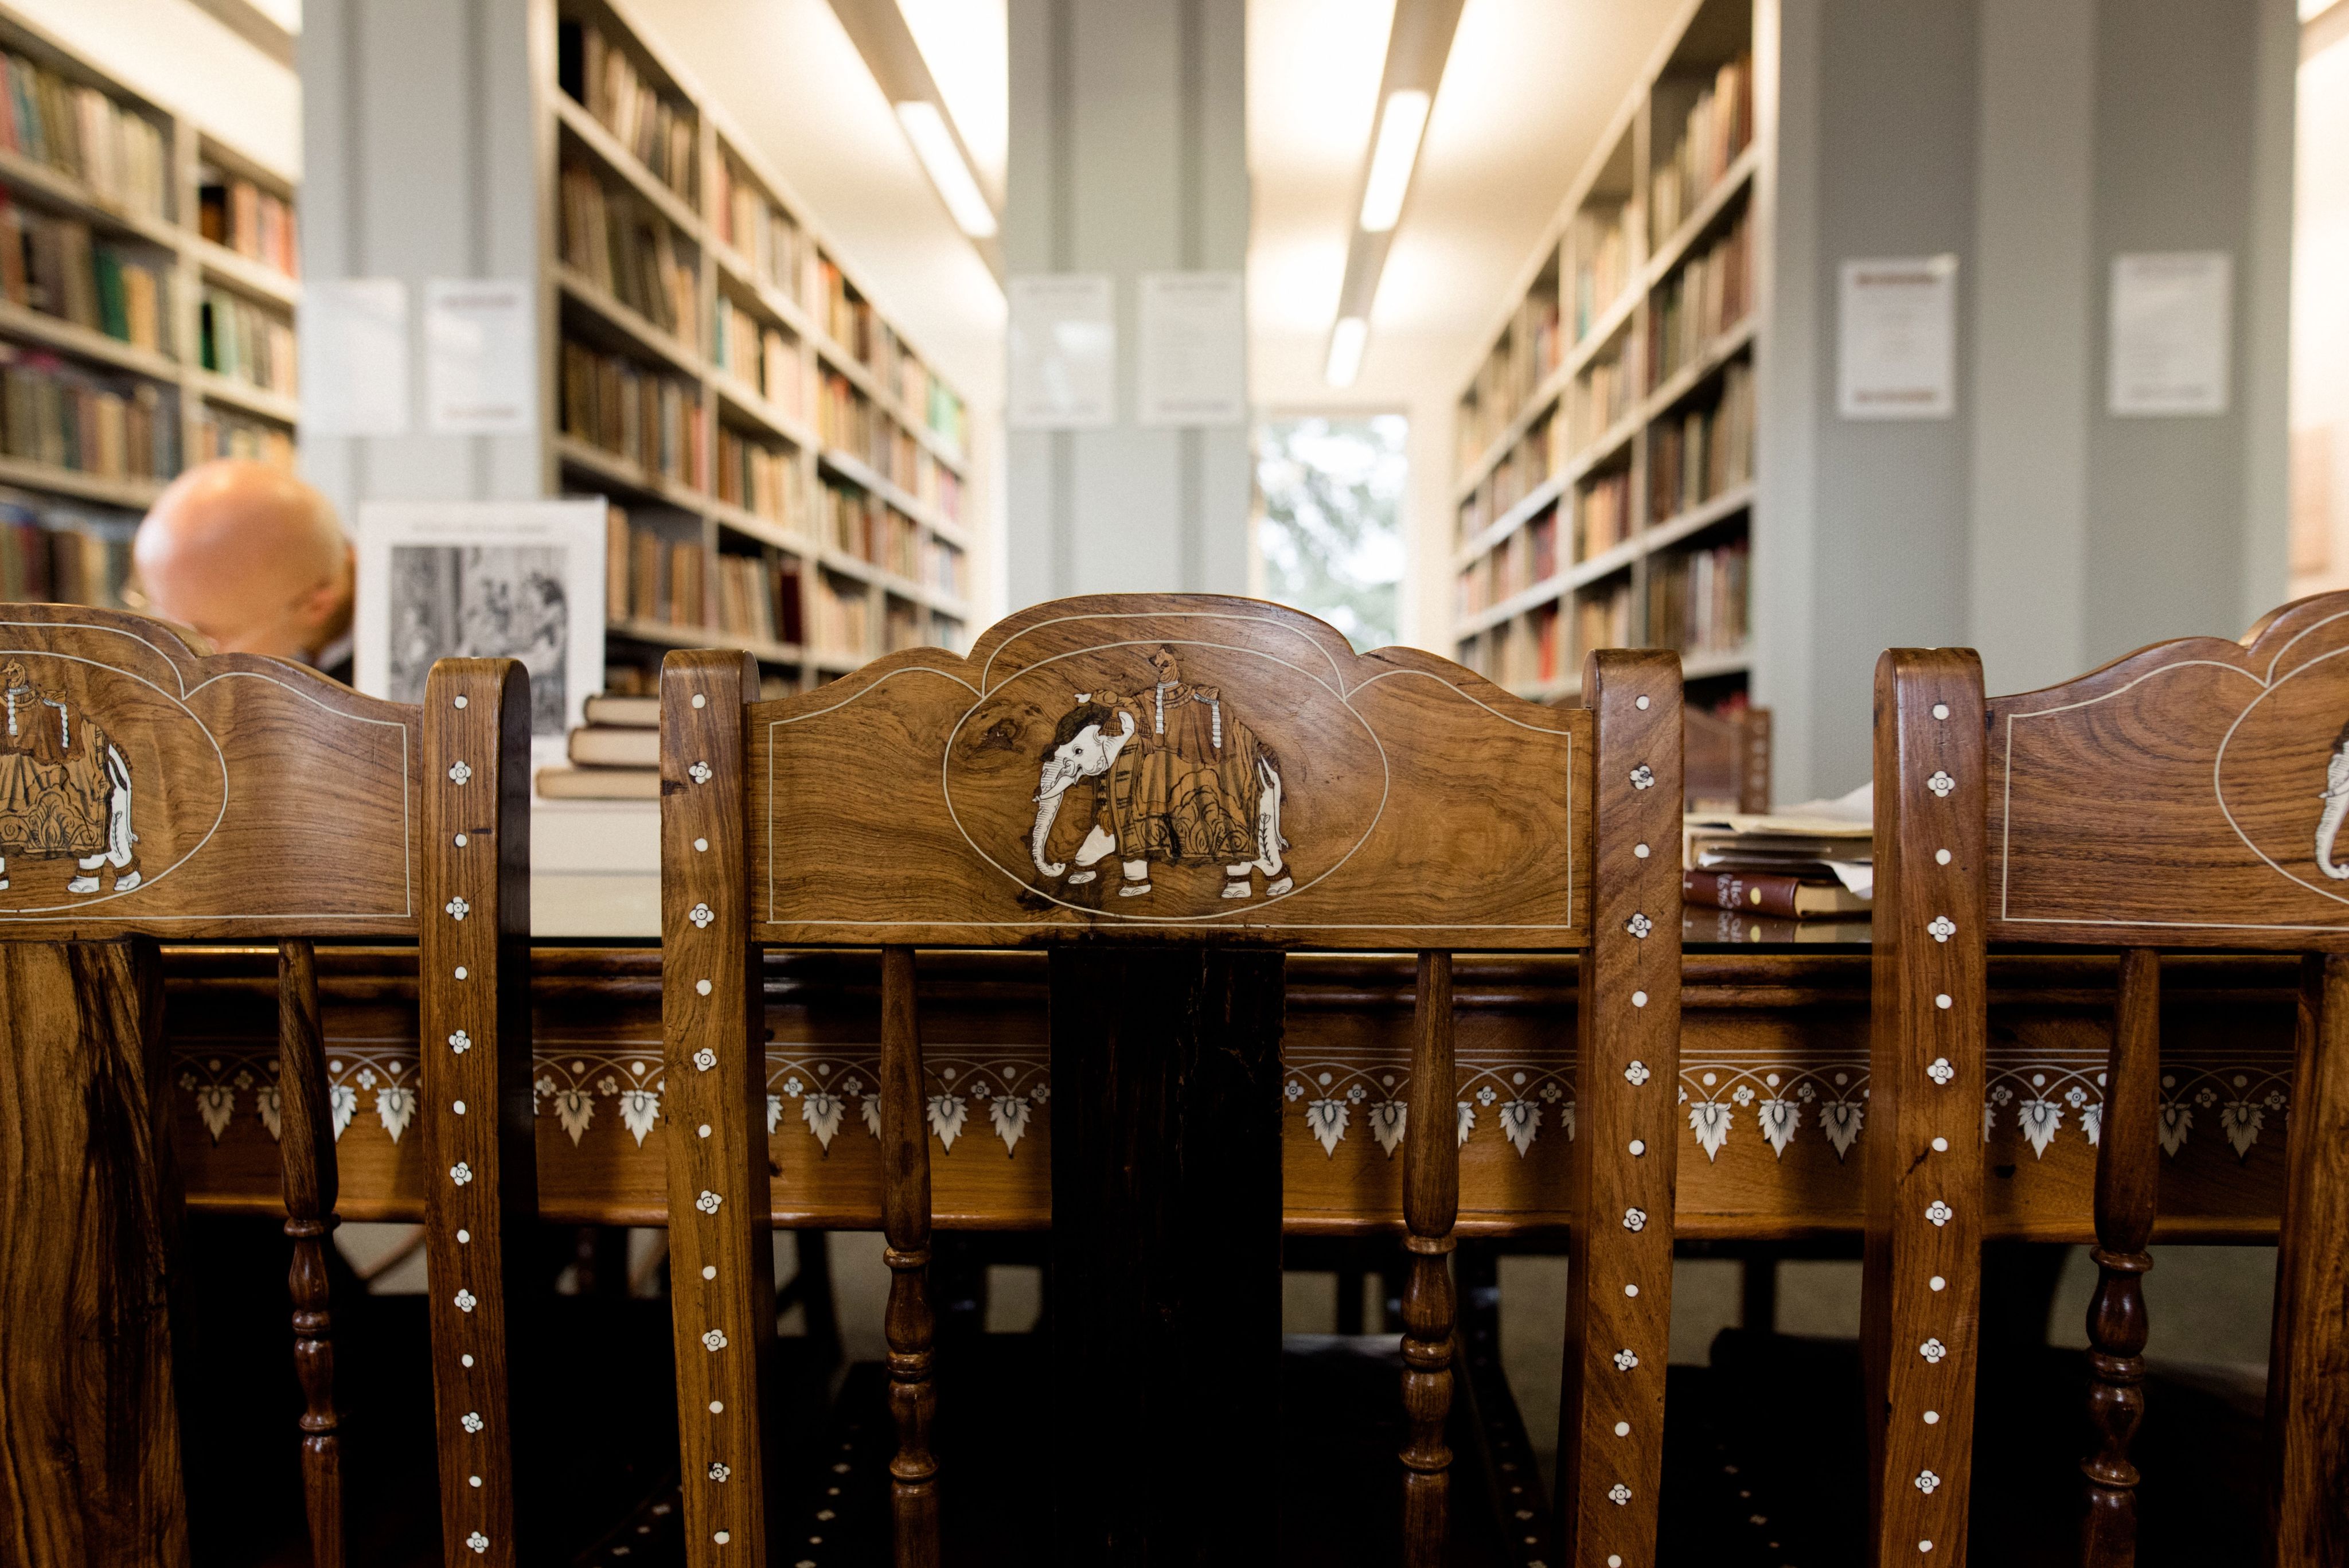 The South Asian Studies Library